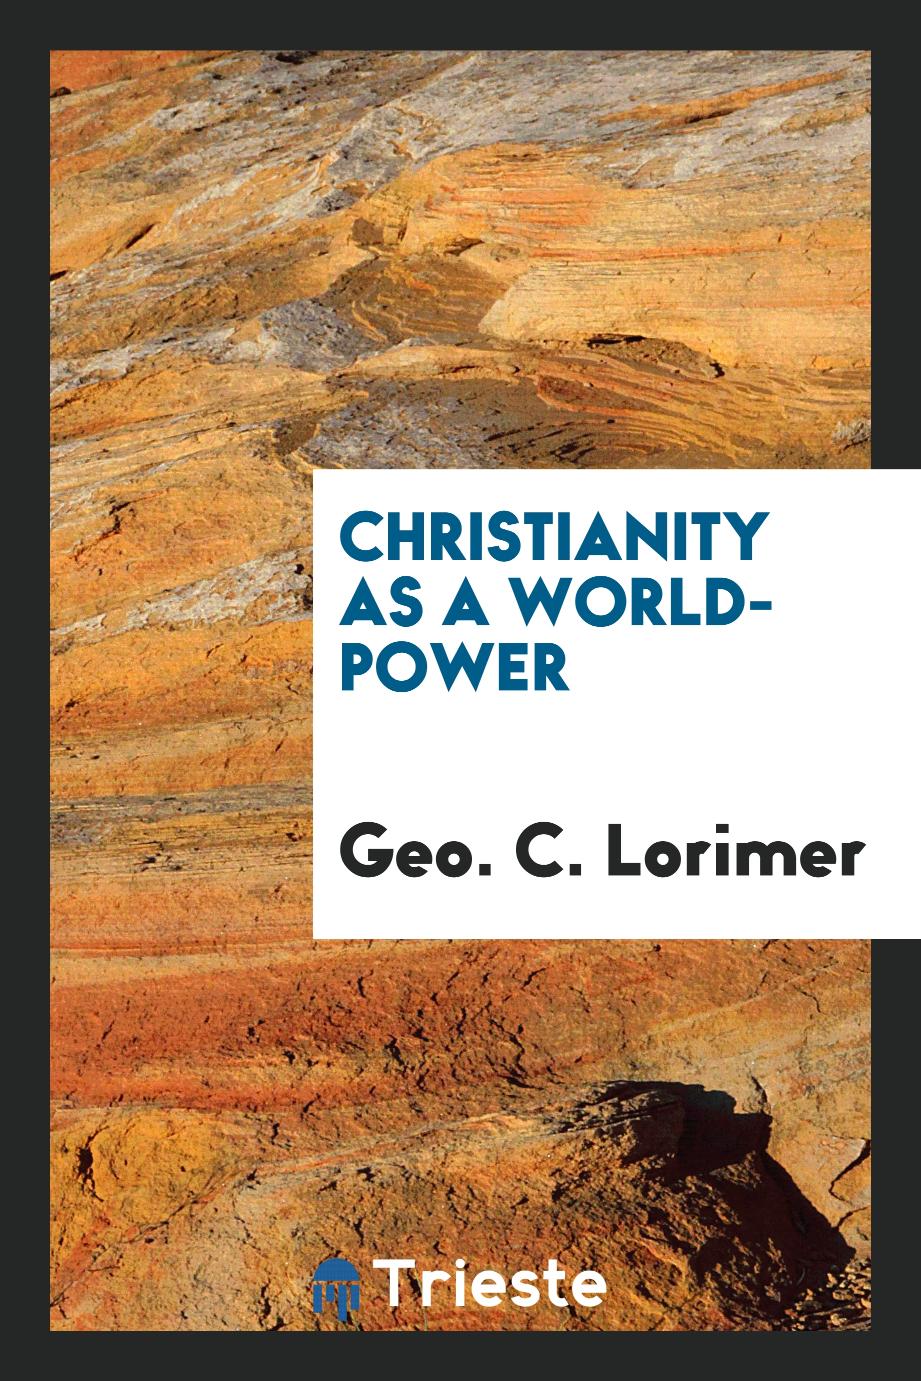 Christianity as a world-power